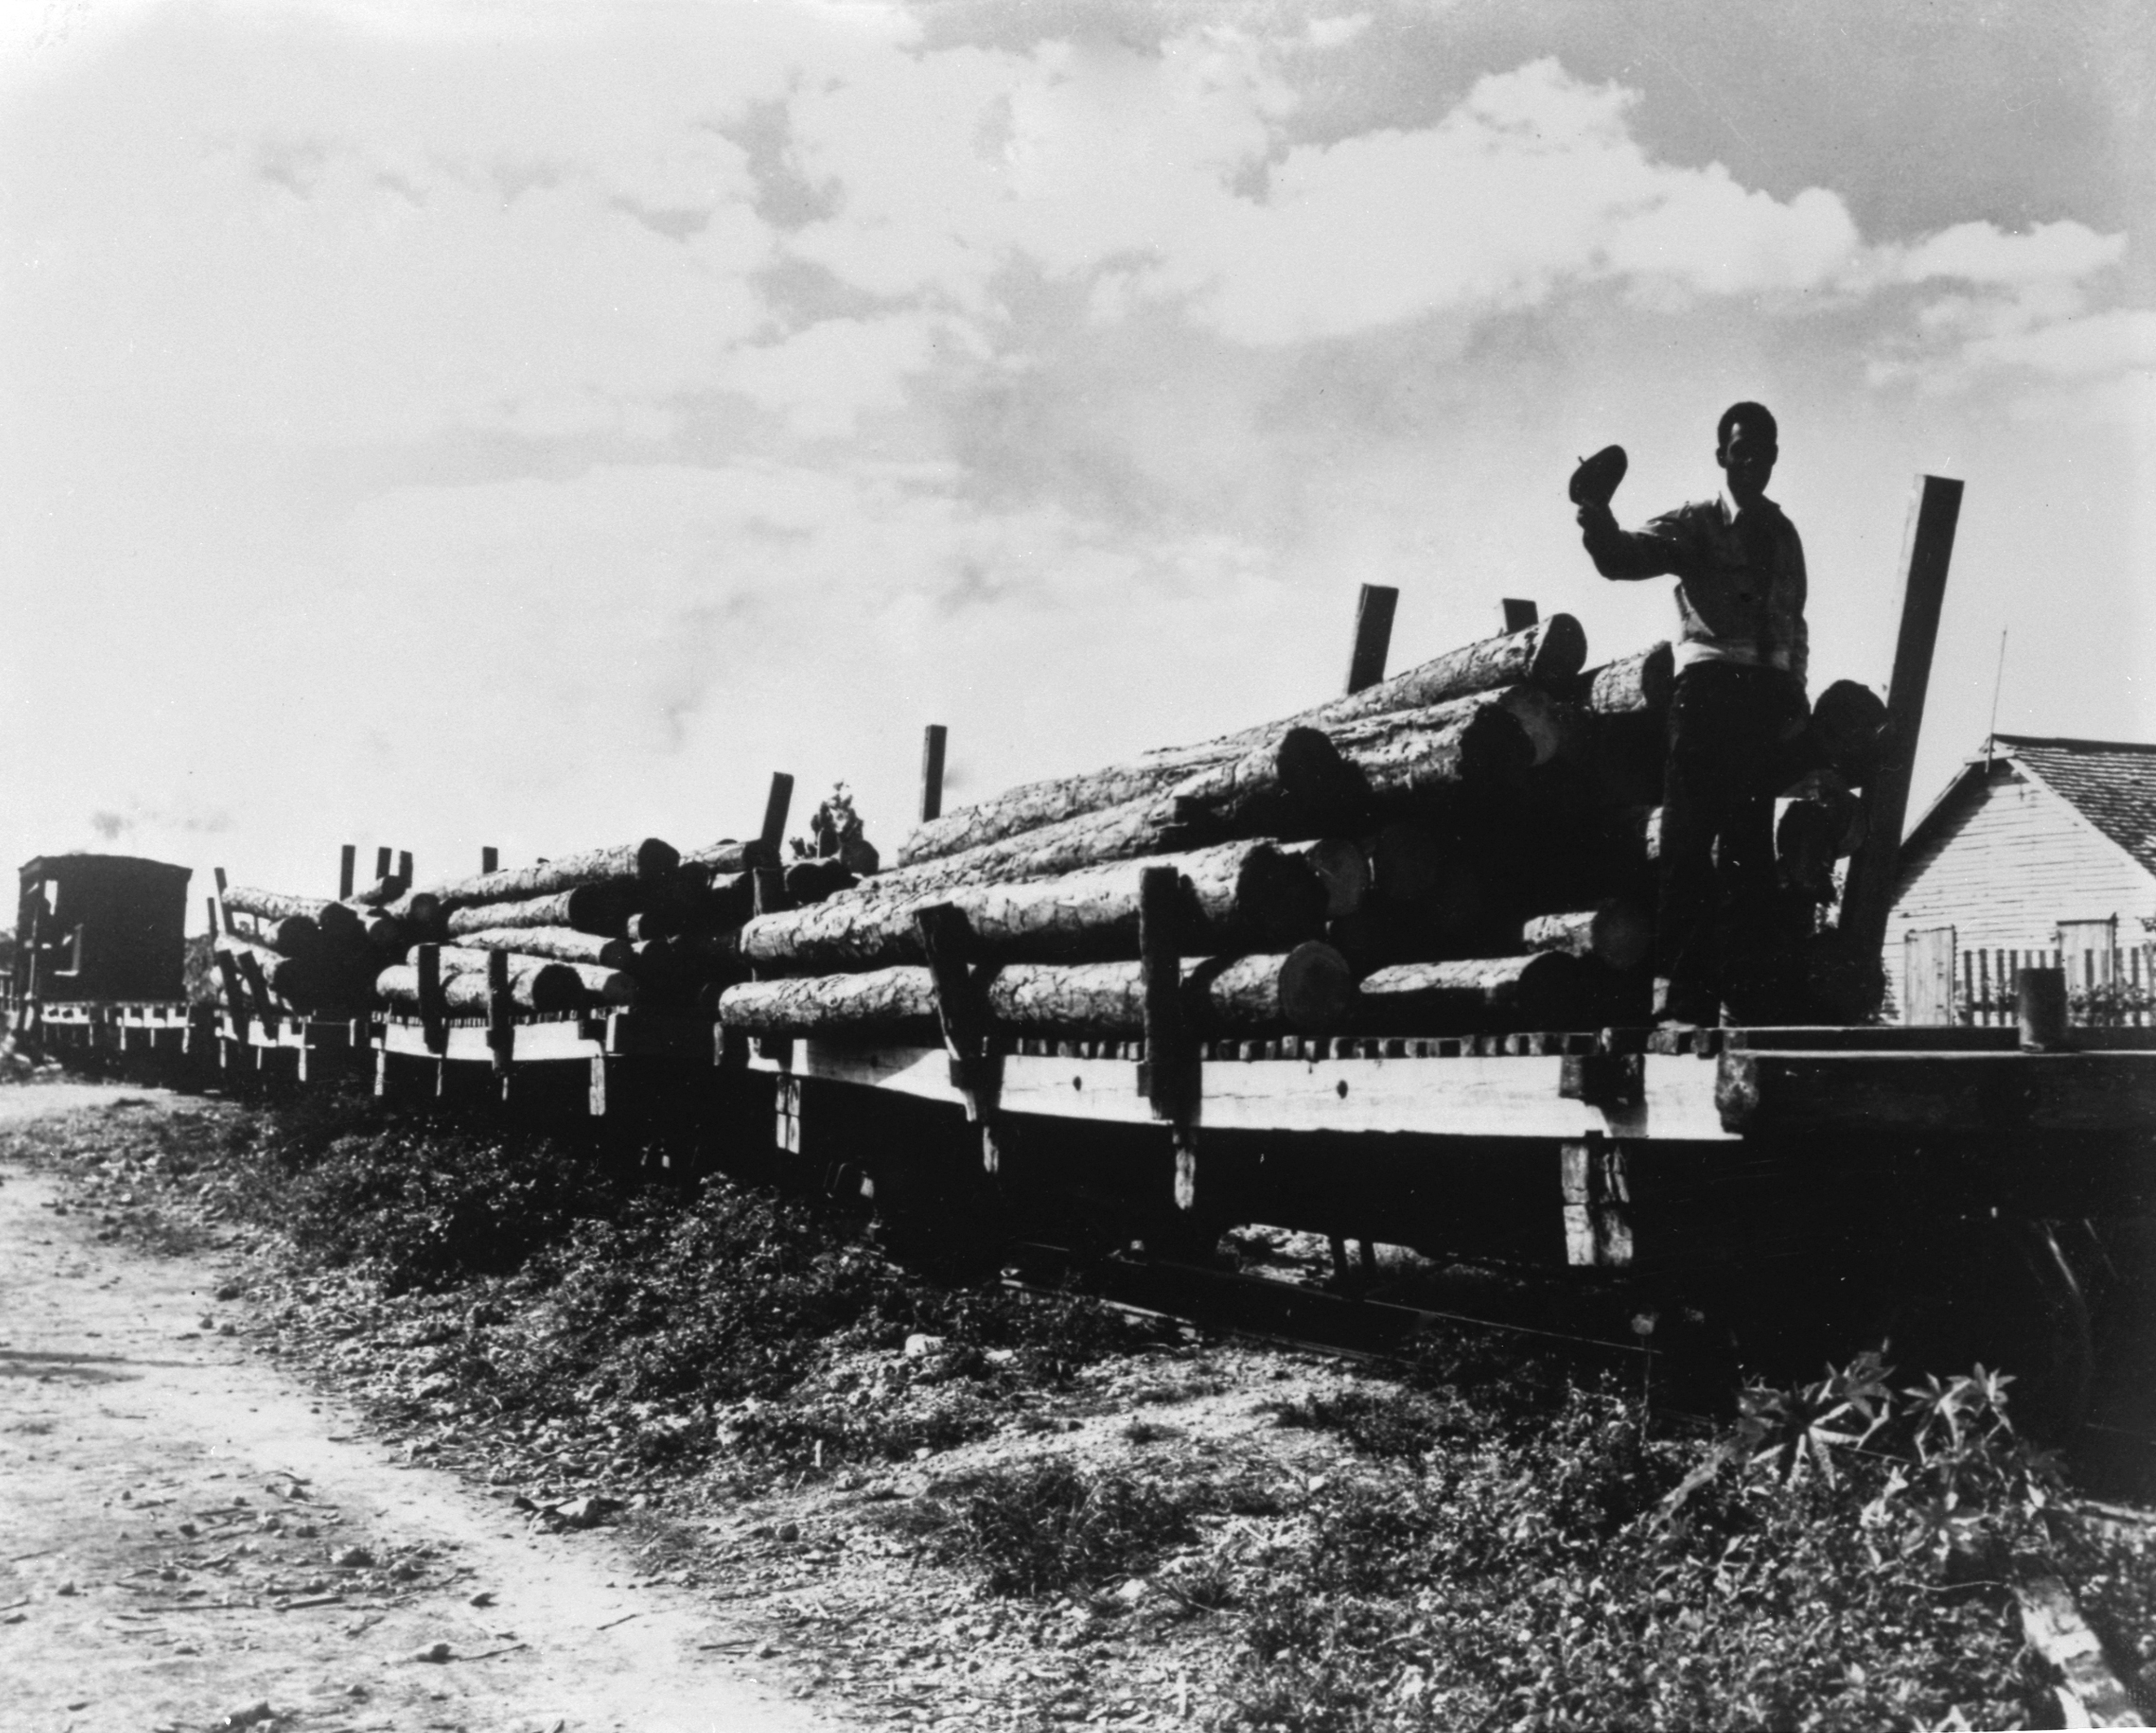 A train of flatcars carrying logs to the mill in Pine Ridge, 1951